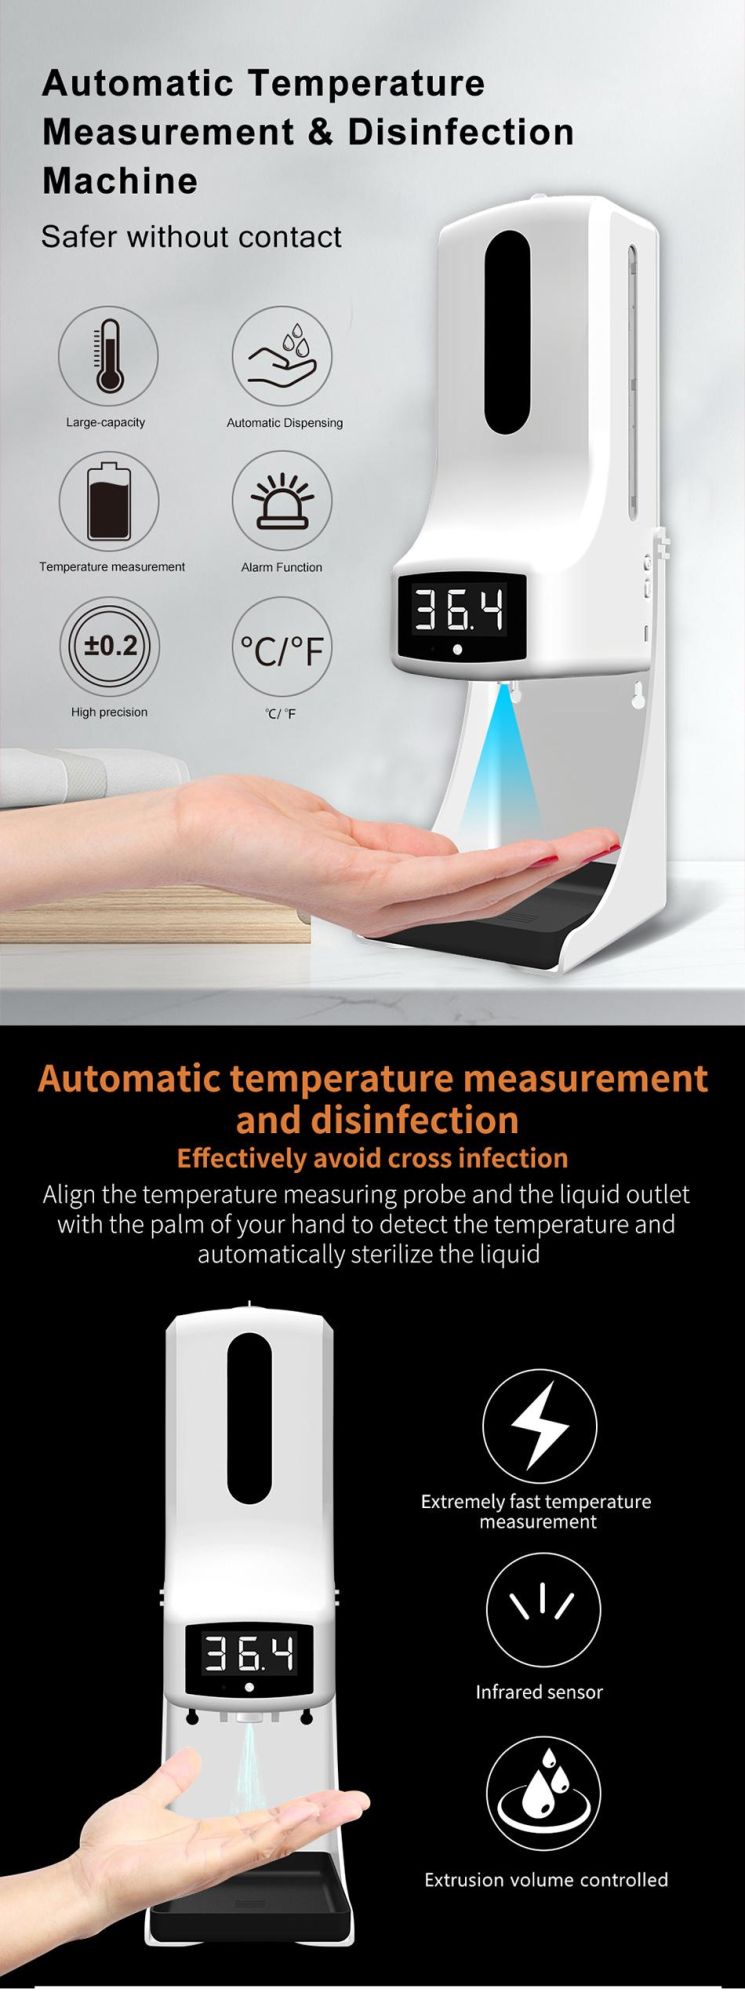 Battery Operated K9 PRO Thermometer Automatic Spray Hand Sanitizer Dispenser